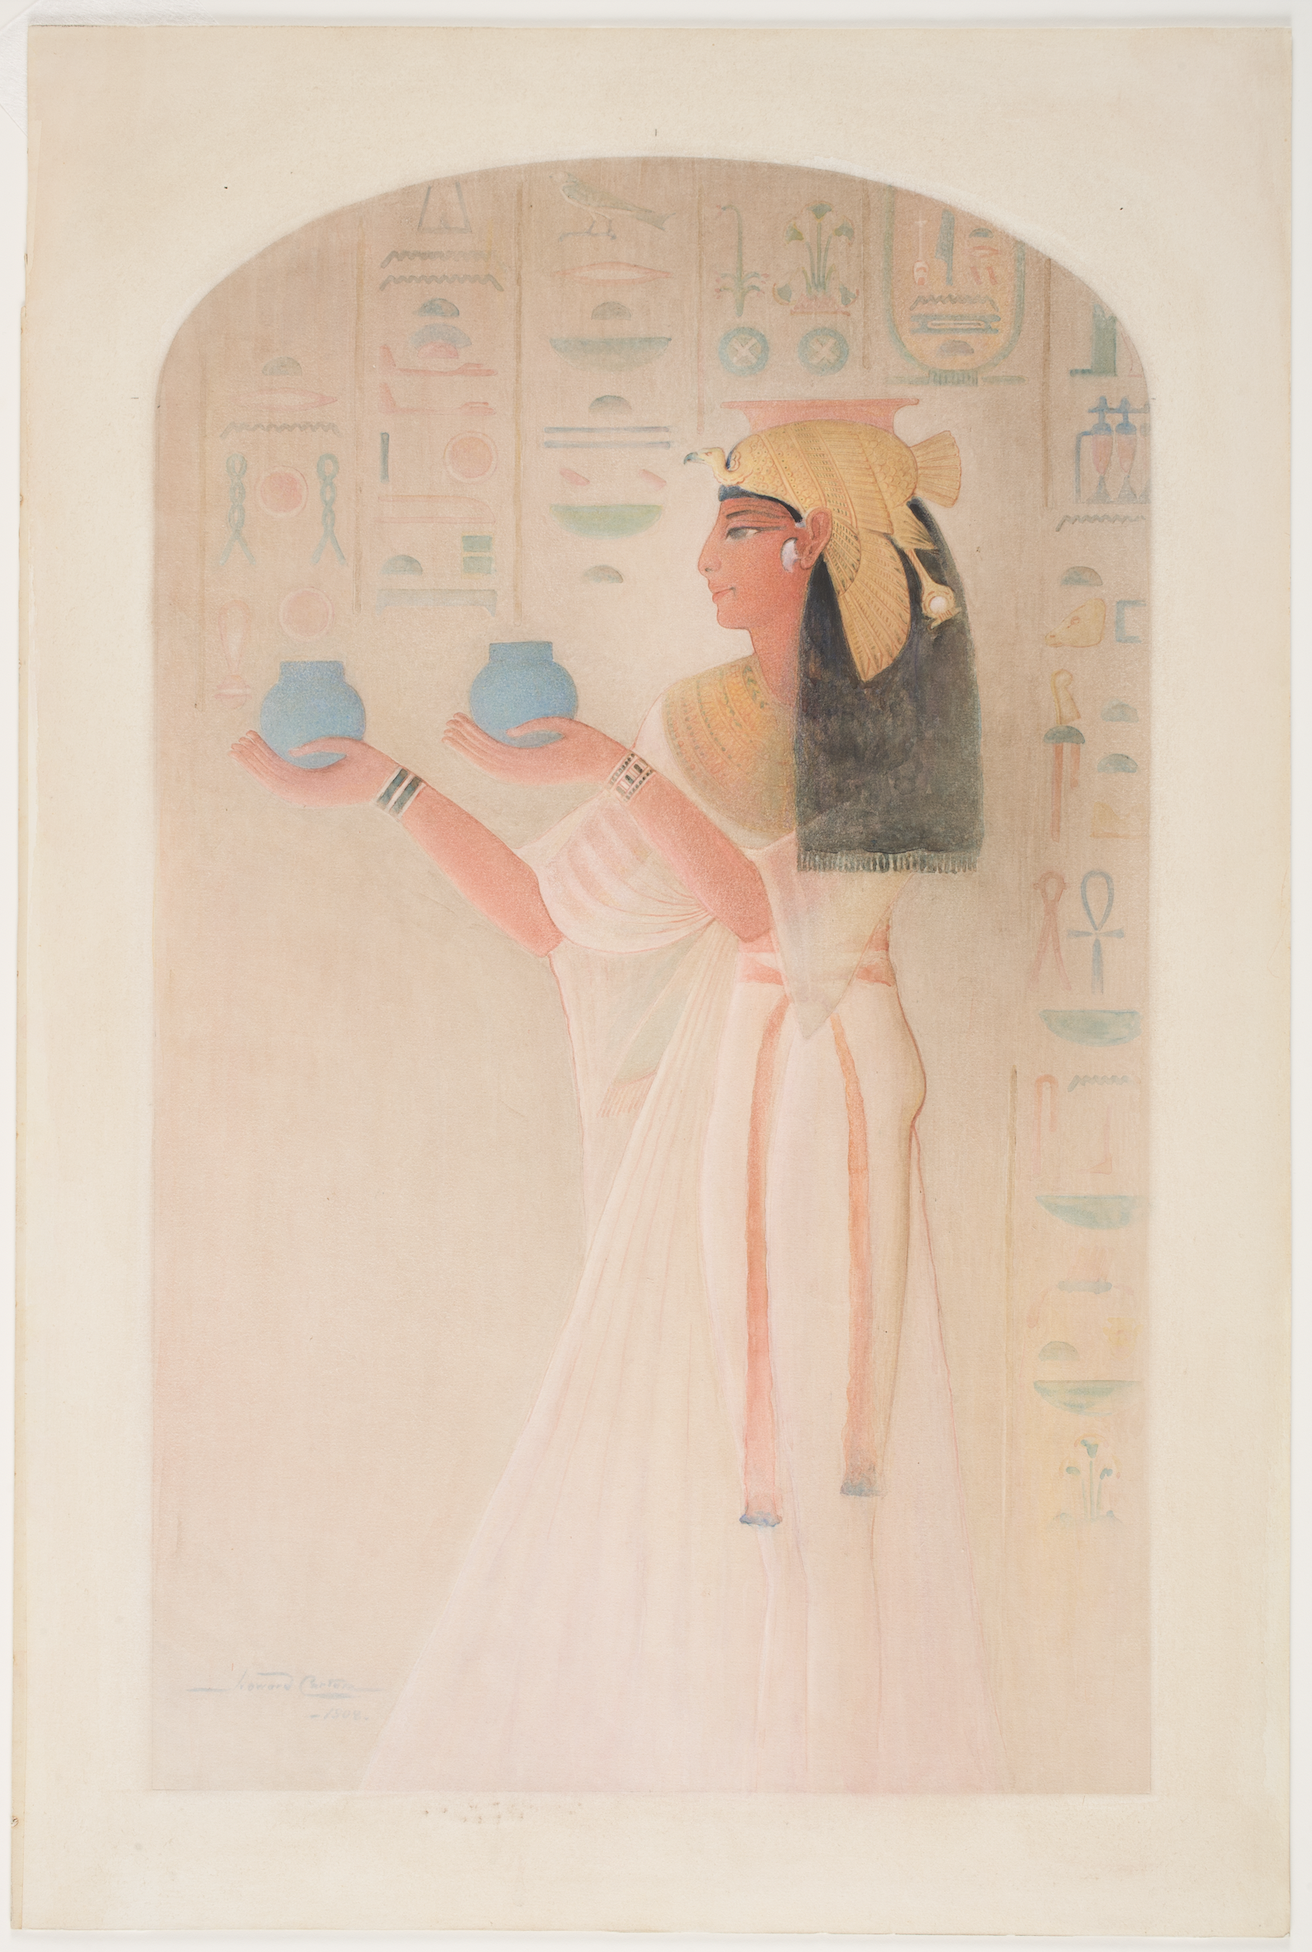 Howard Carter, ‘Queen Nefertari Offering Two Pots,’ 1908, watercolor over graphite on medium, smooth cream wove paper. Mrs. Kingsmill Marrs Collection, Worcester Art Museum, 1925.144 